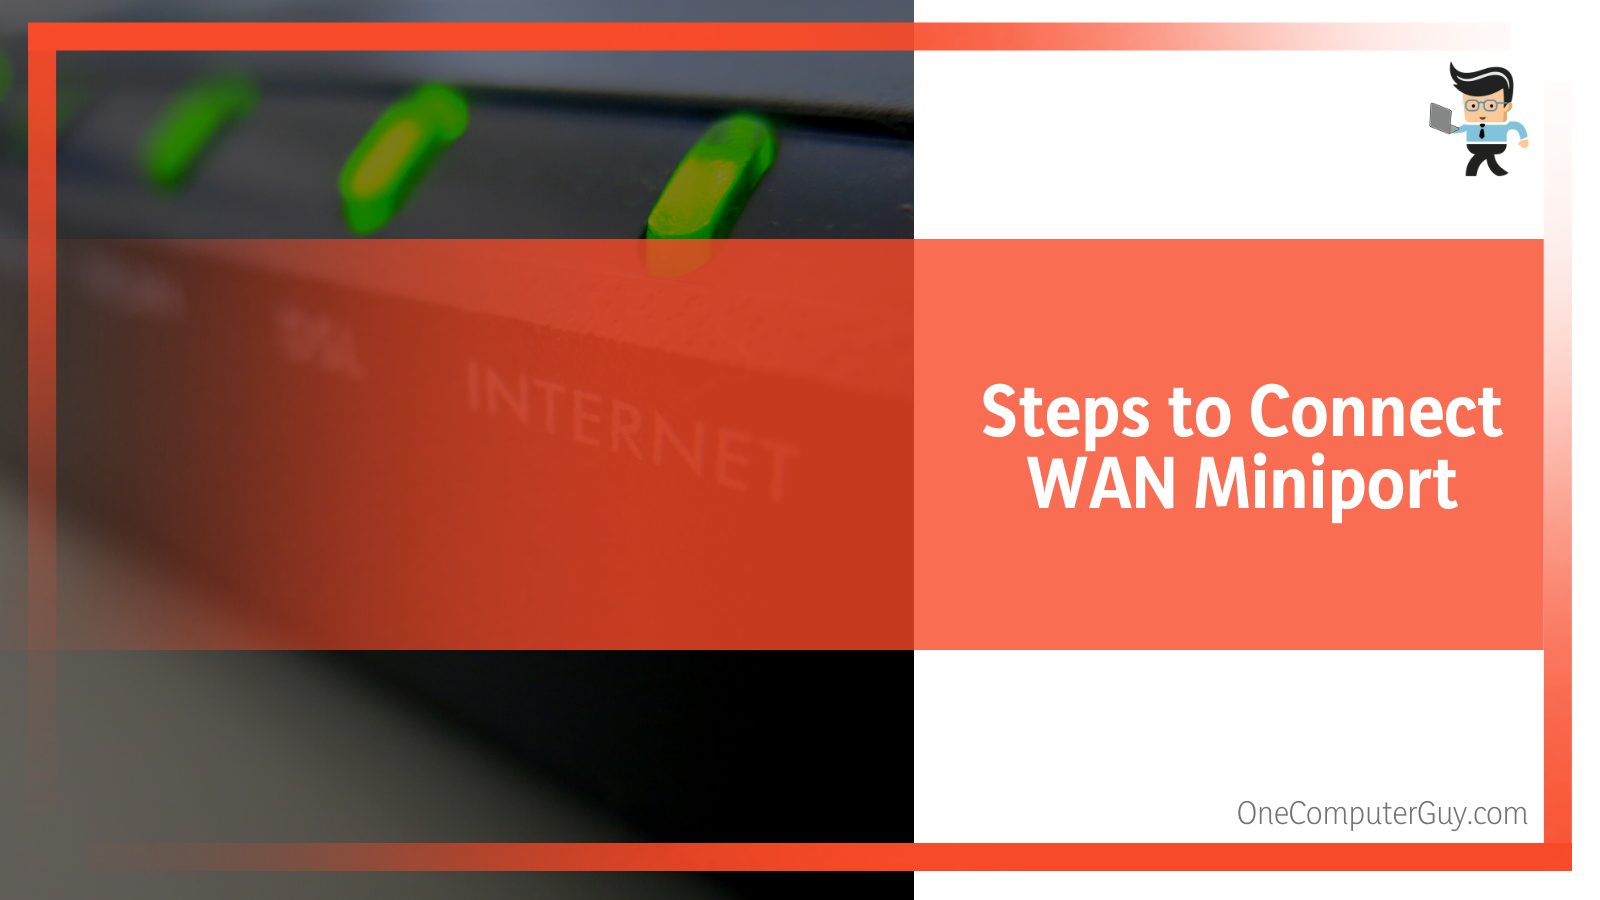 Steps to Connect WAN Miniport